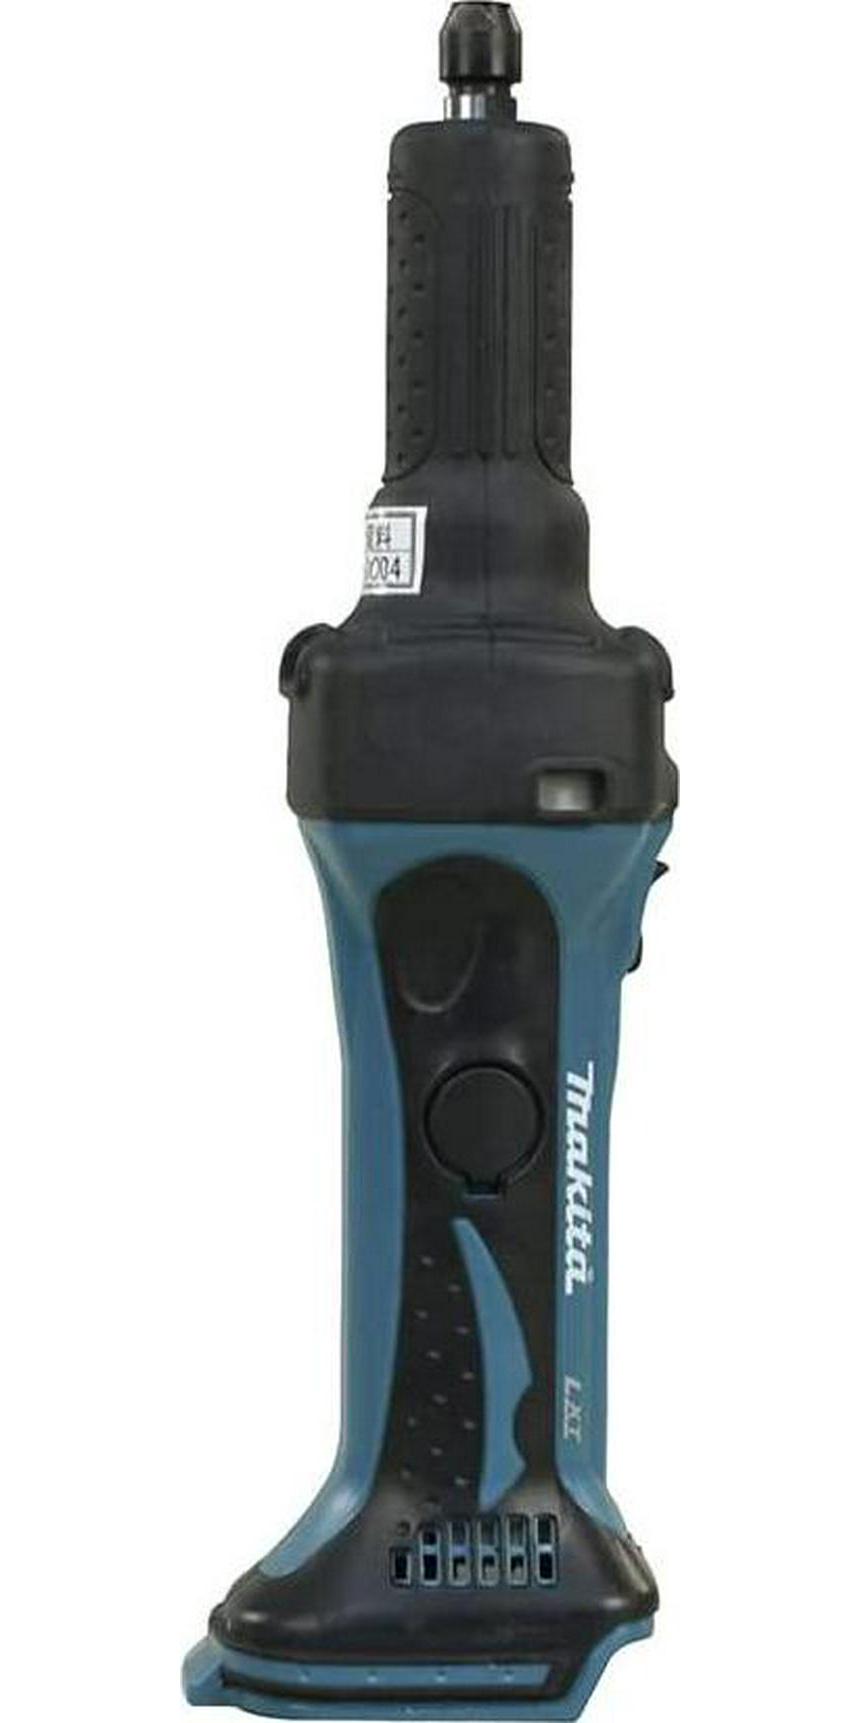 Makita, Makita DGD800Z 18V Li-Ion LXT Die Grinder - Batteries and Charger Not Included